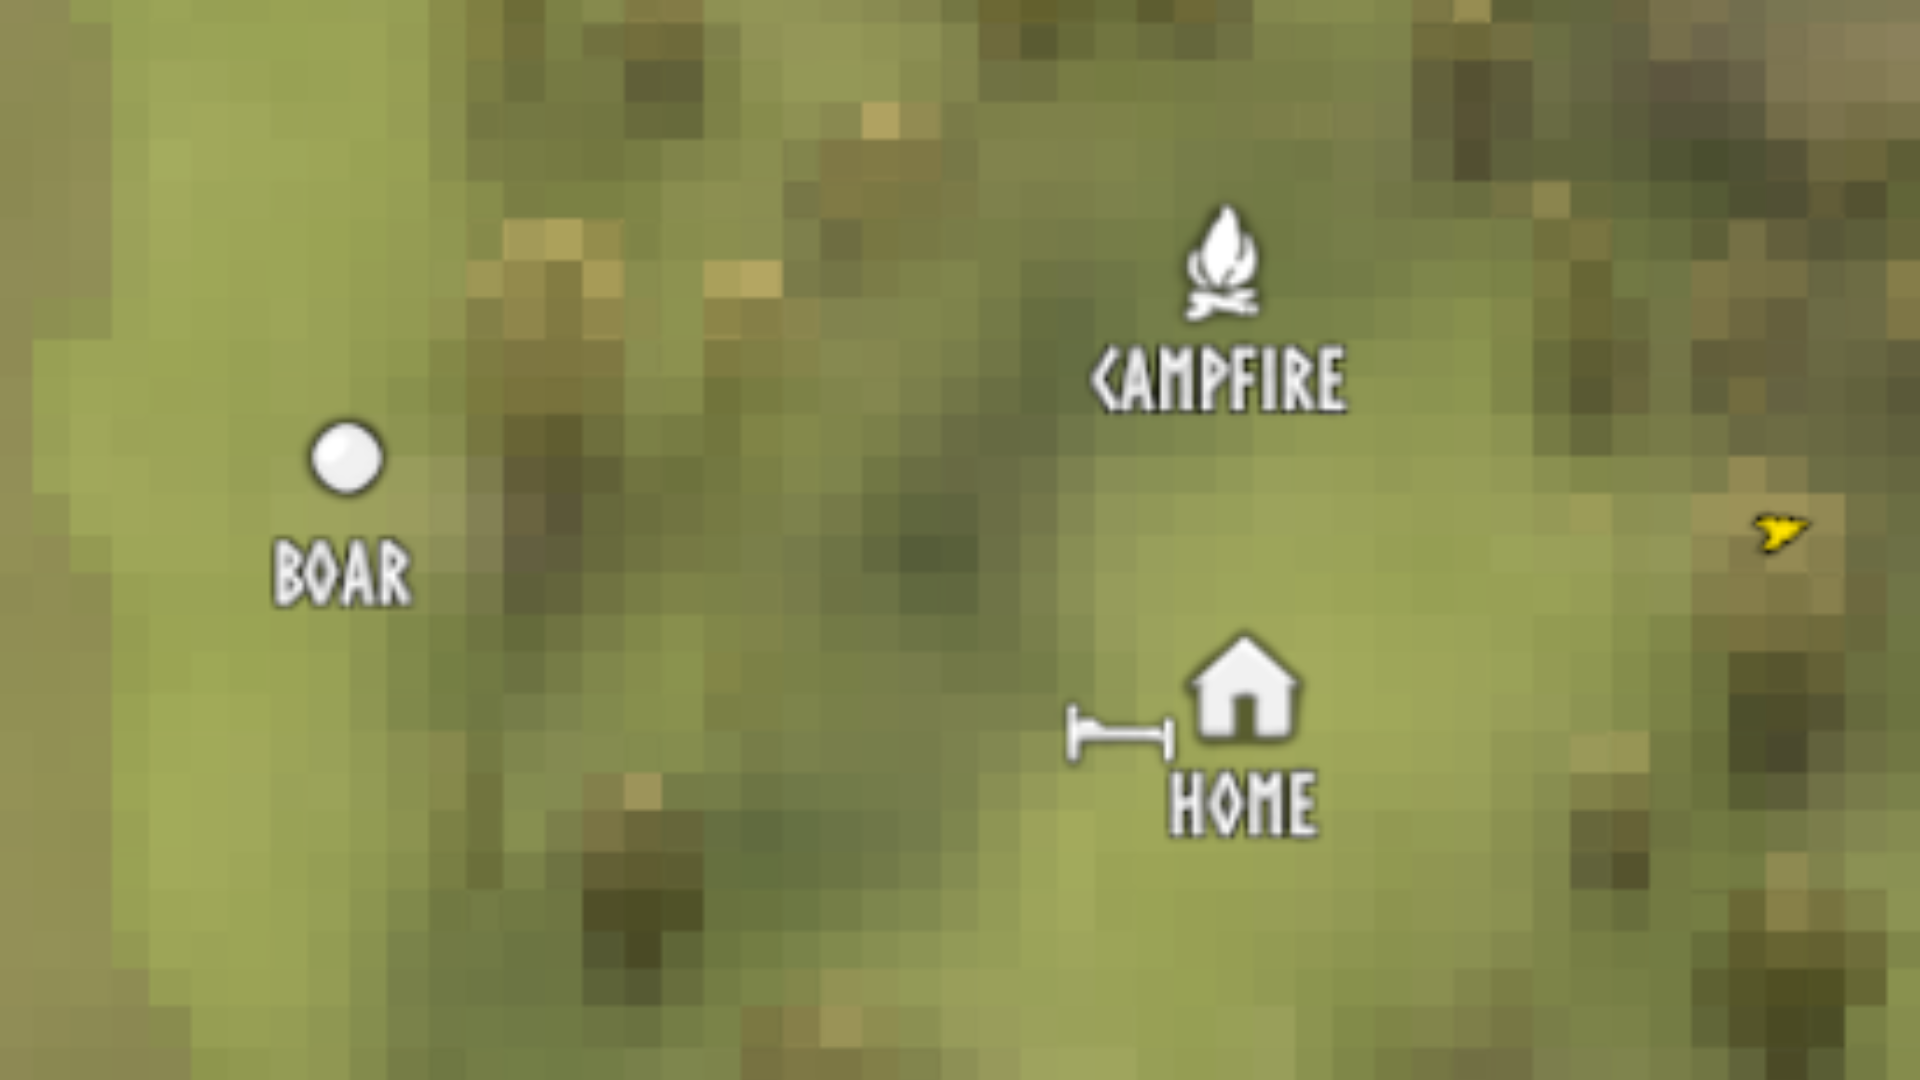 A Valheim screenshot of part of the map, with several map markers used to denote different points of interest.